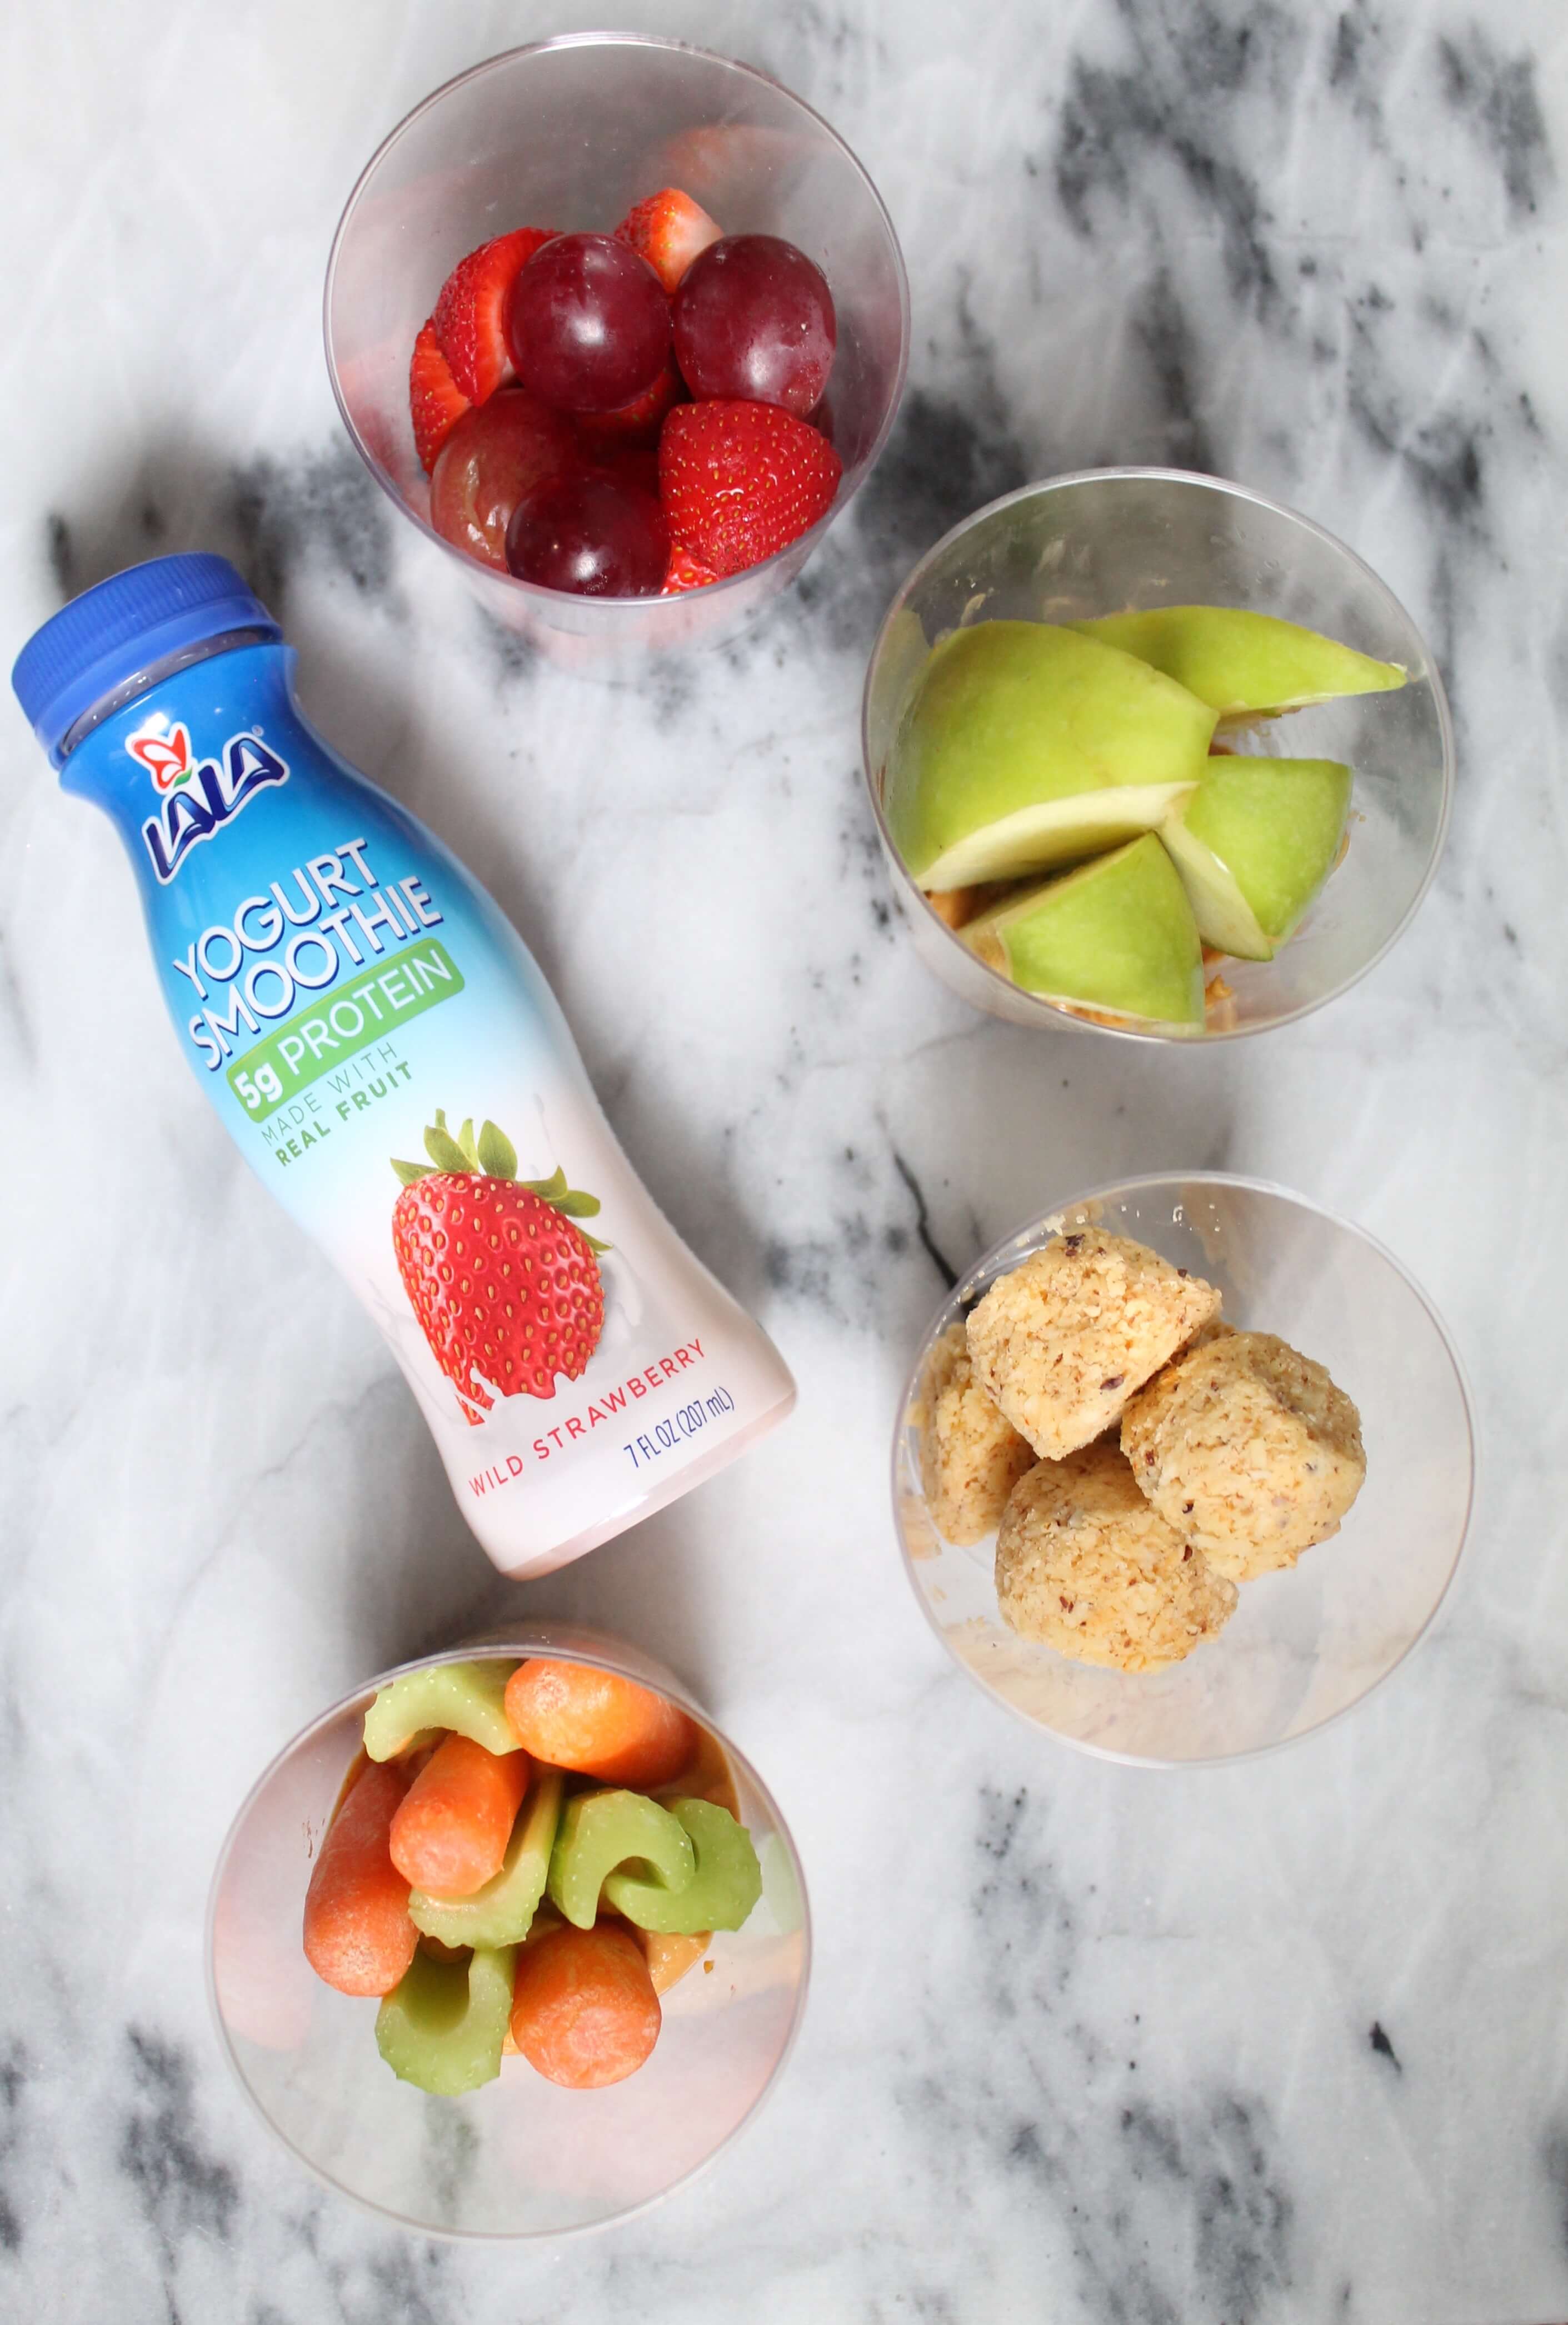 5 snack hacks to make healthy living easier: How to make Lala Yogurt Smoothies, fresh fruits, veggies, and more part of your smart snacking plan. #lalachallenge #ad